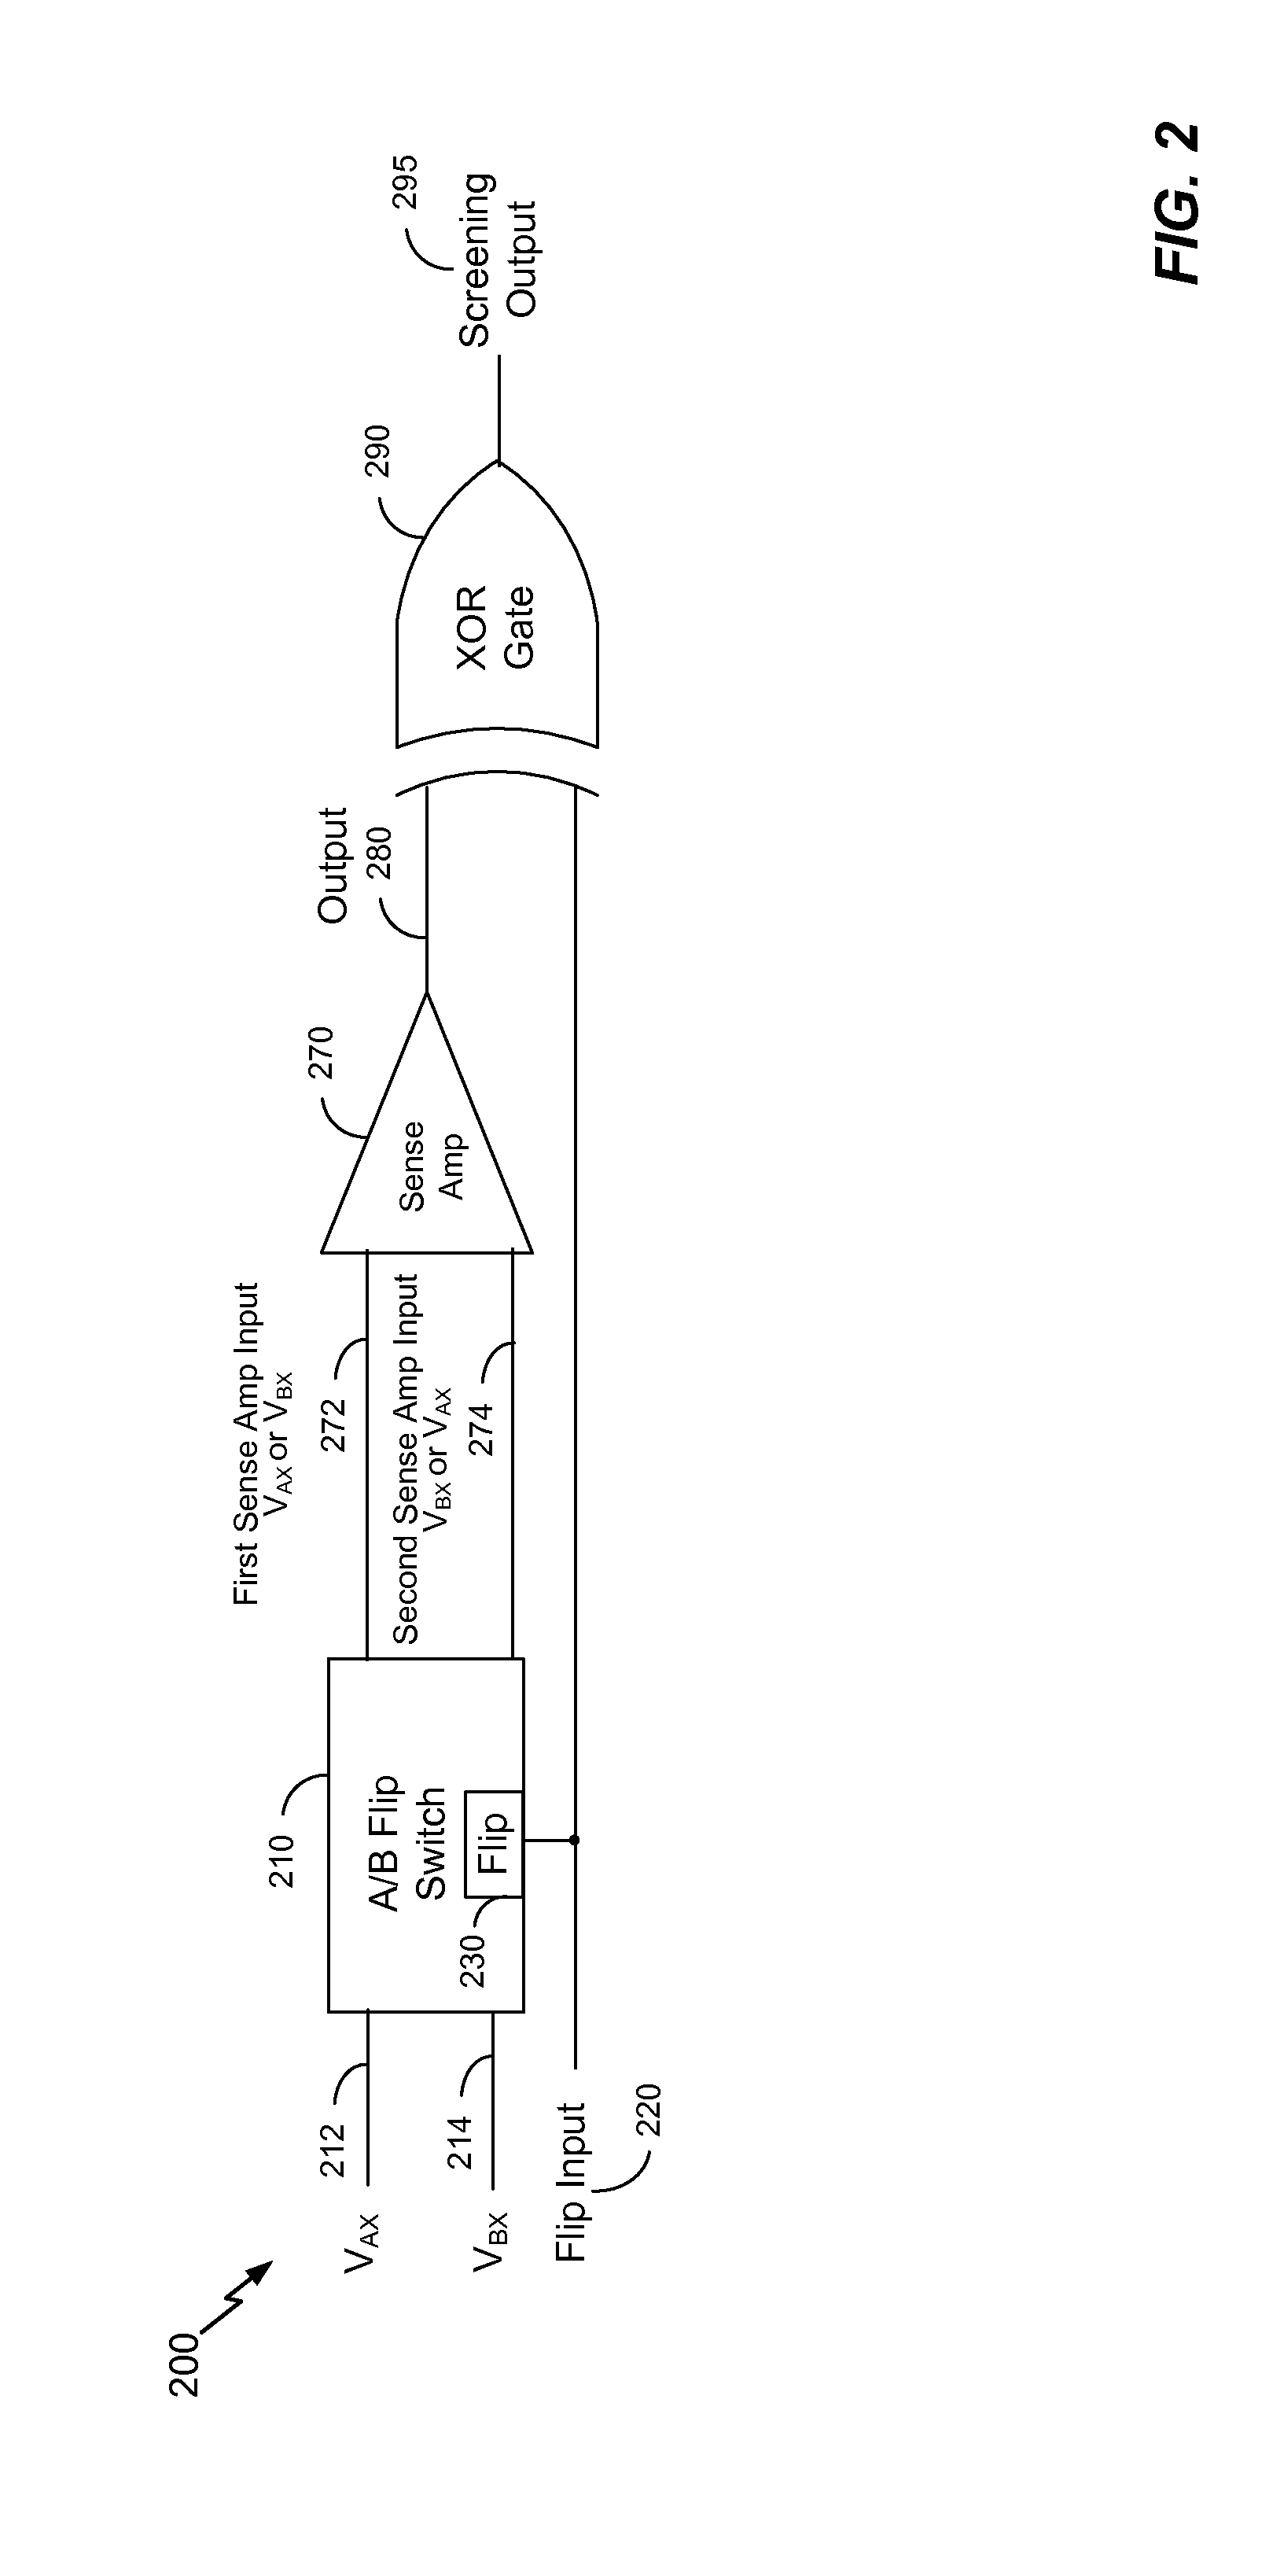 Physically Unclonable Function Implemented Through Threshold Voltage Comparison